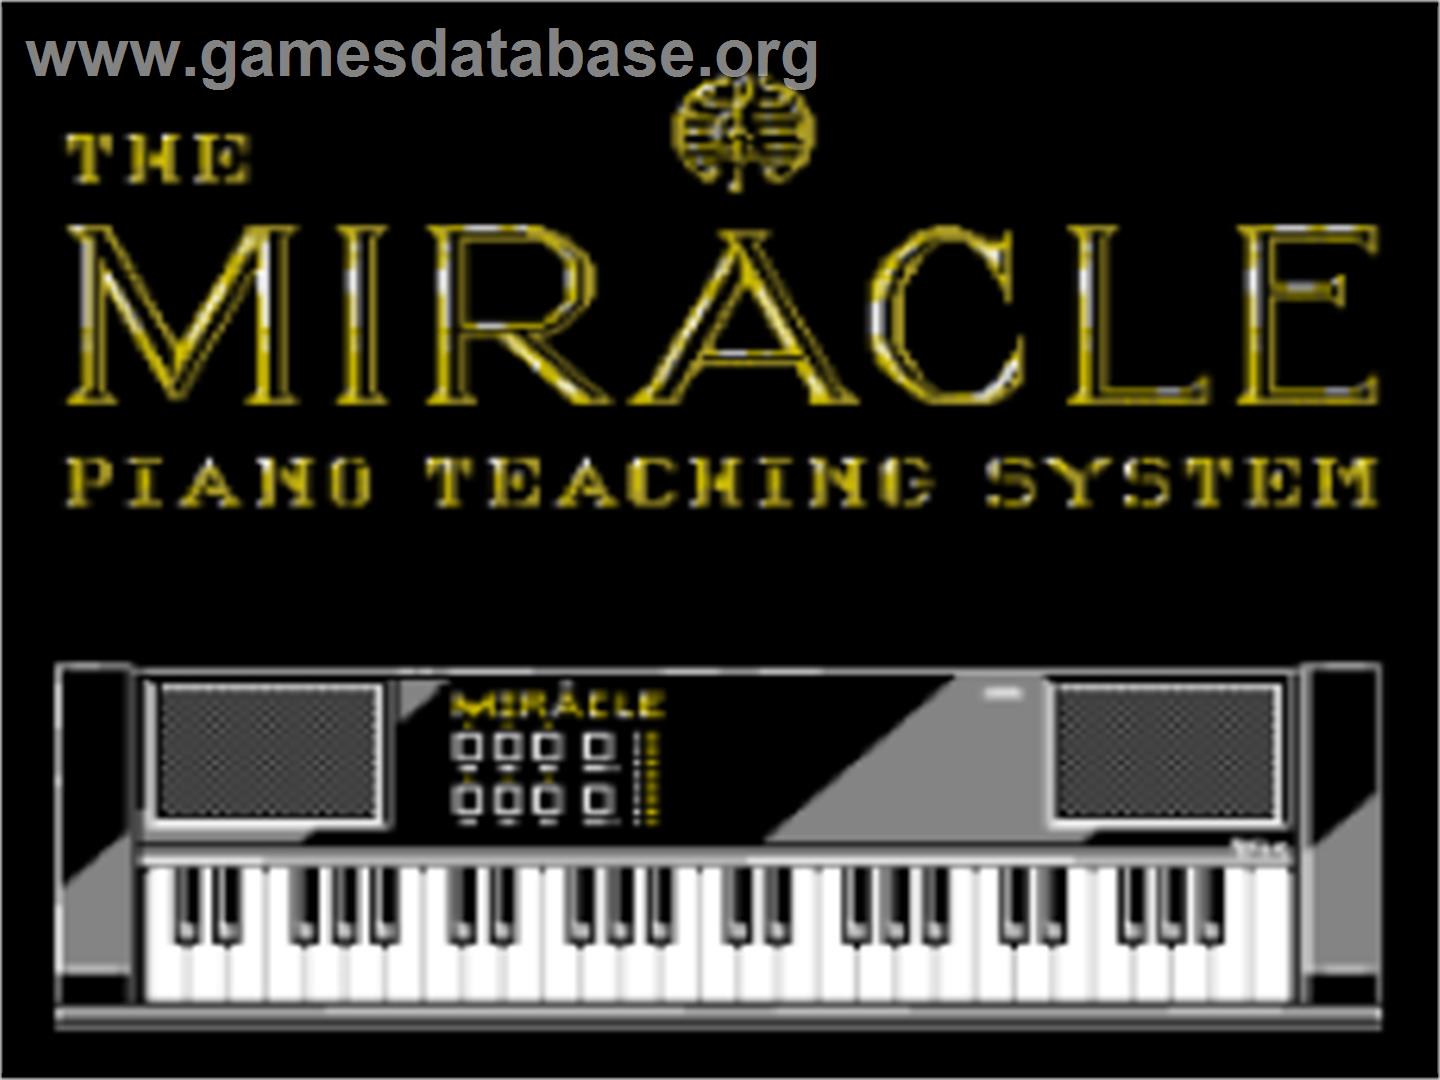 The Miracle Piano Teaching System - Nintendo SNES - Artwork - Title Screen